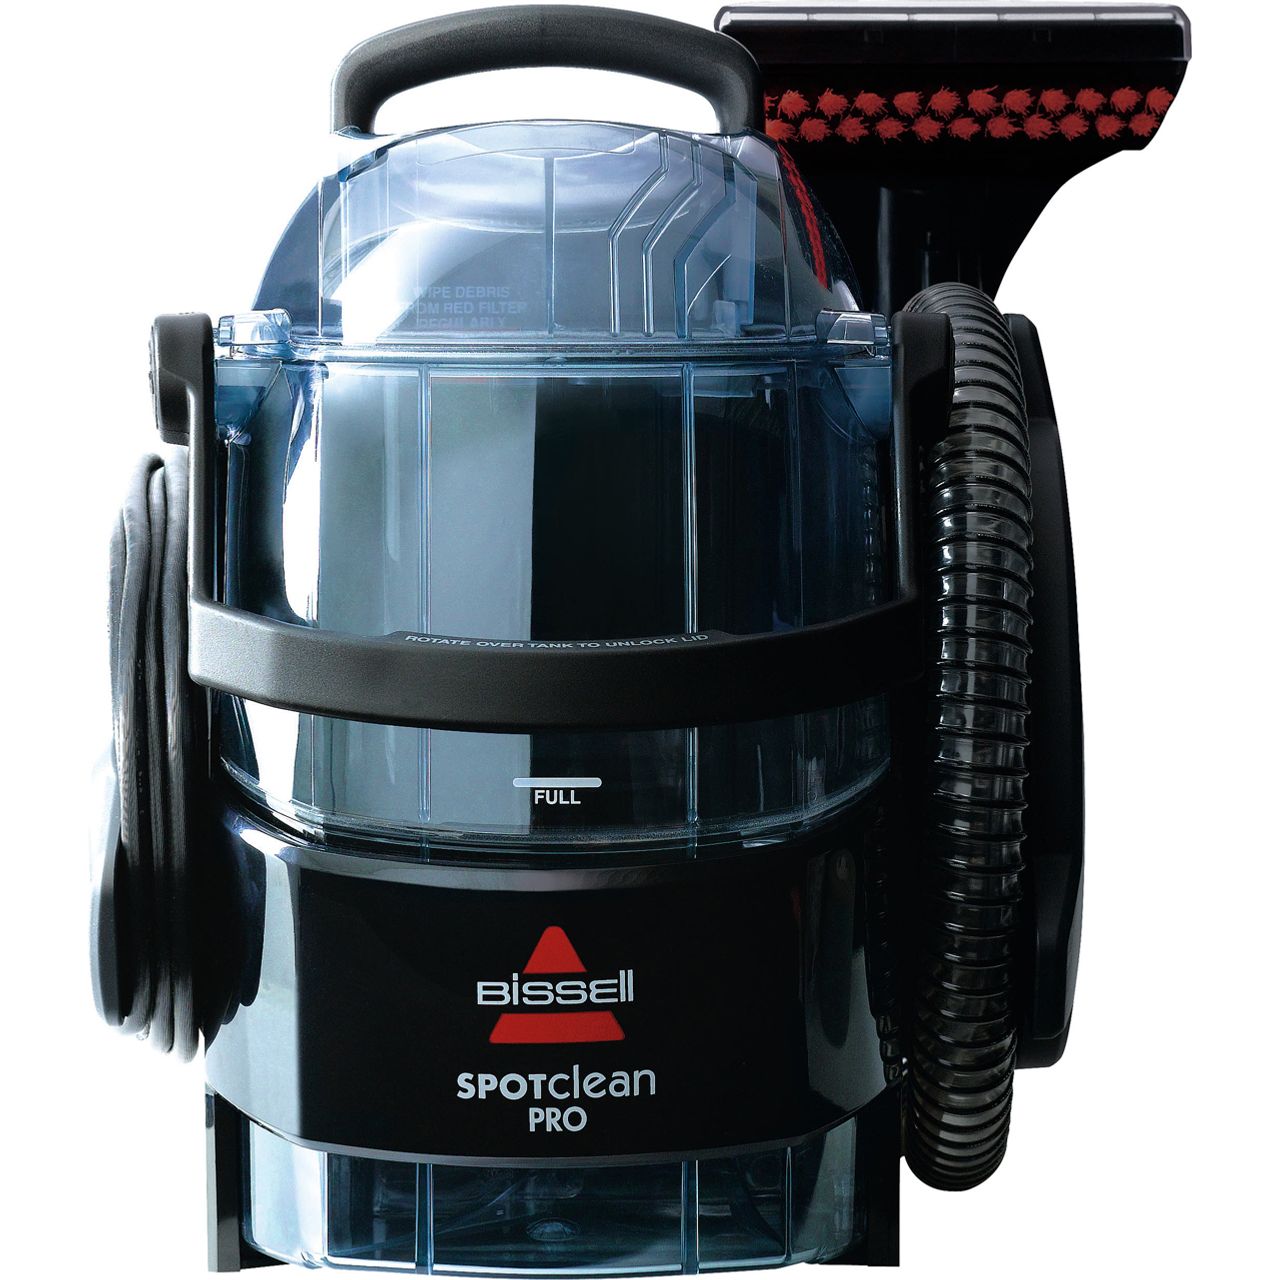 Bissell SpotClean Pro Carpet Cleaner